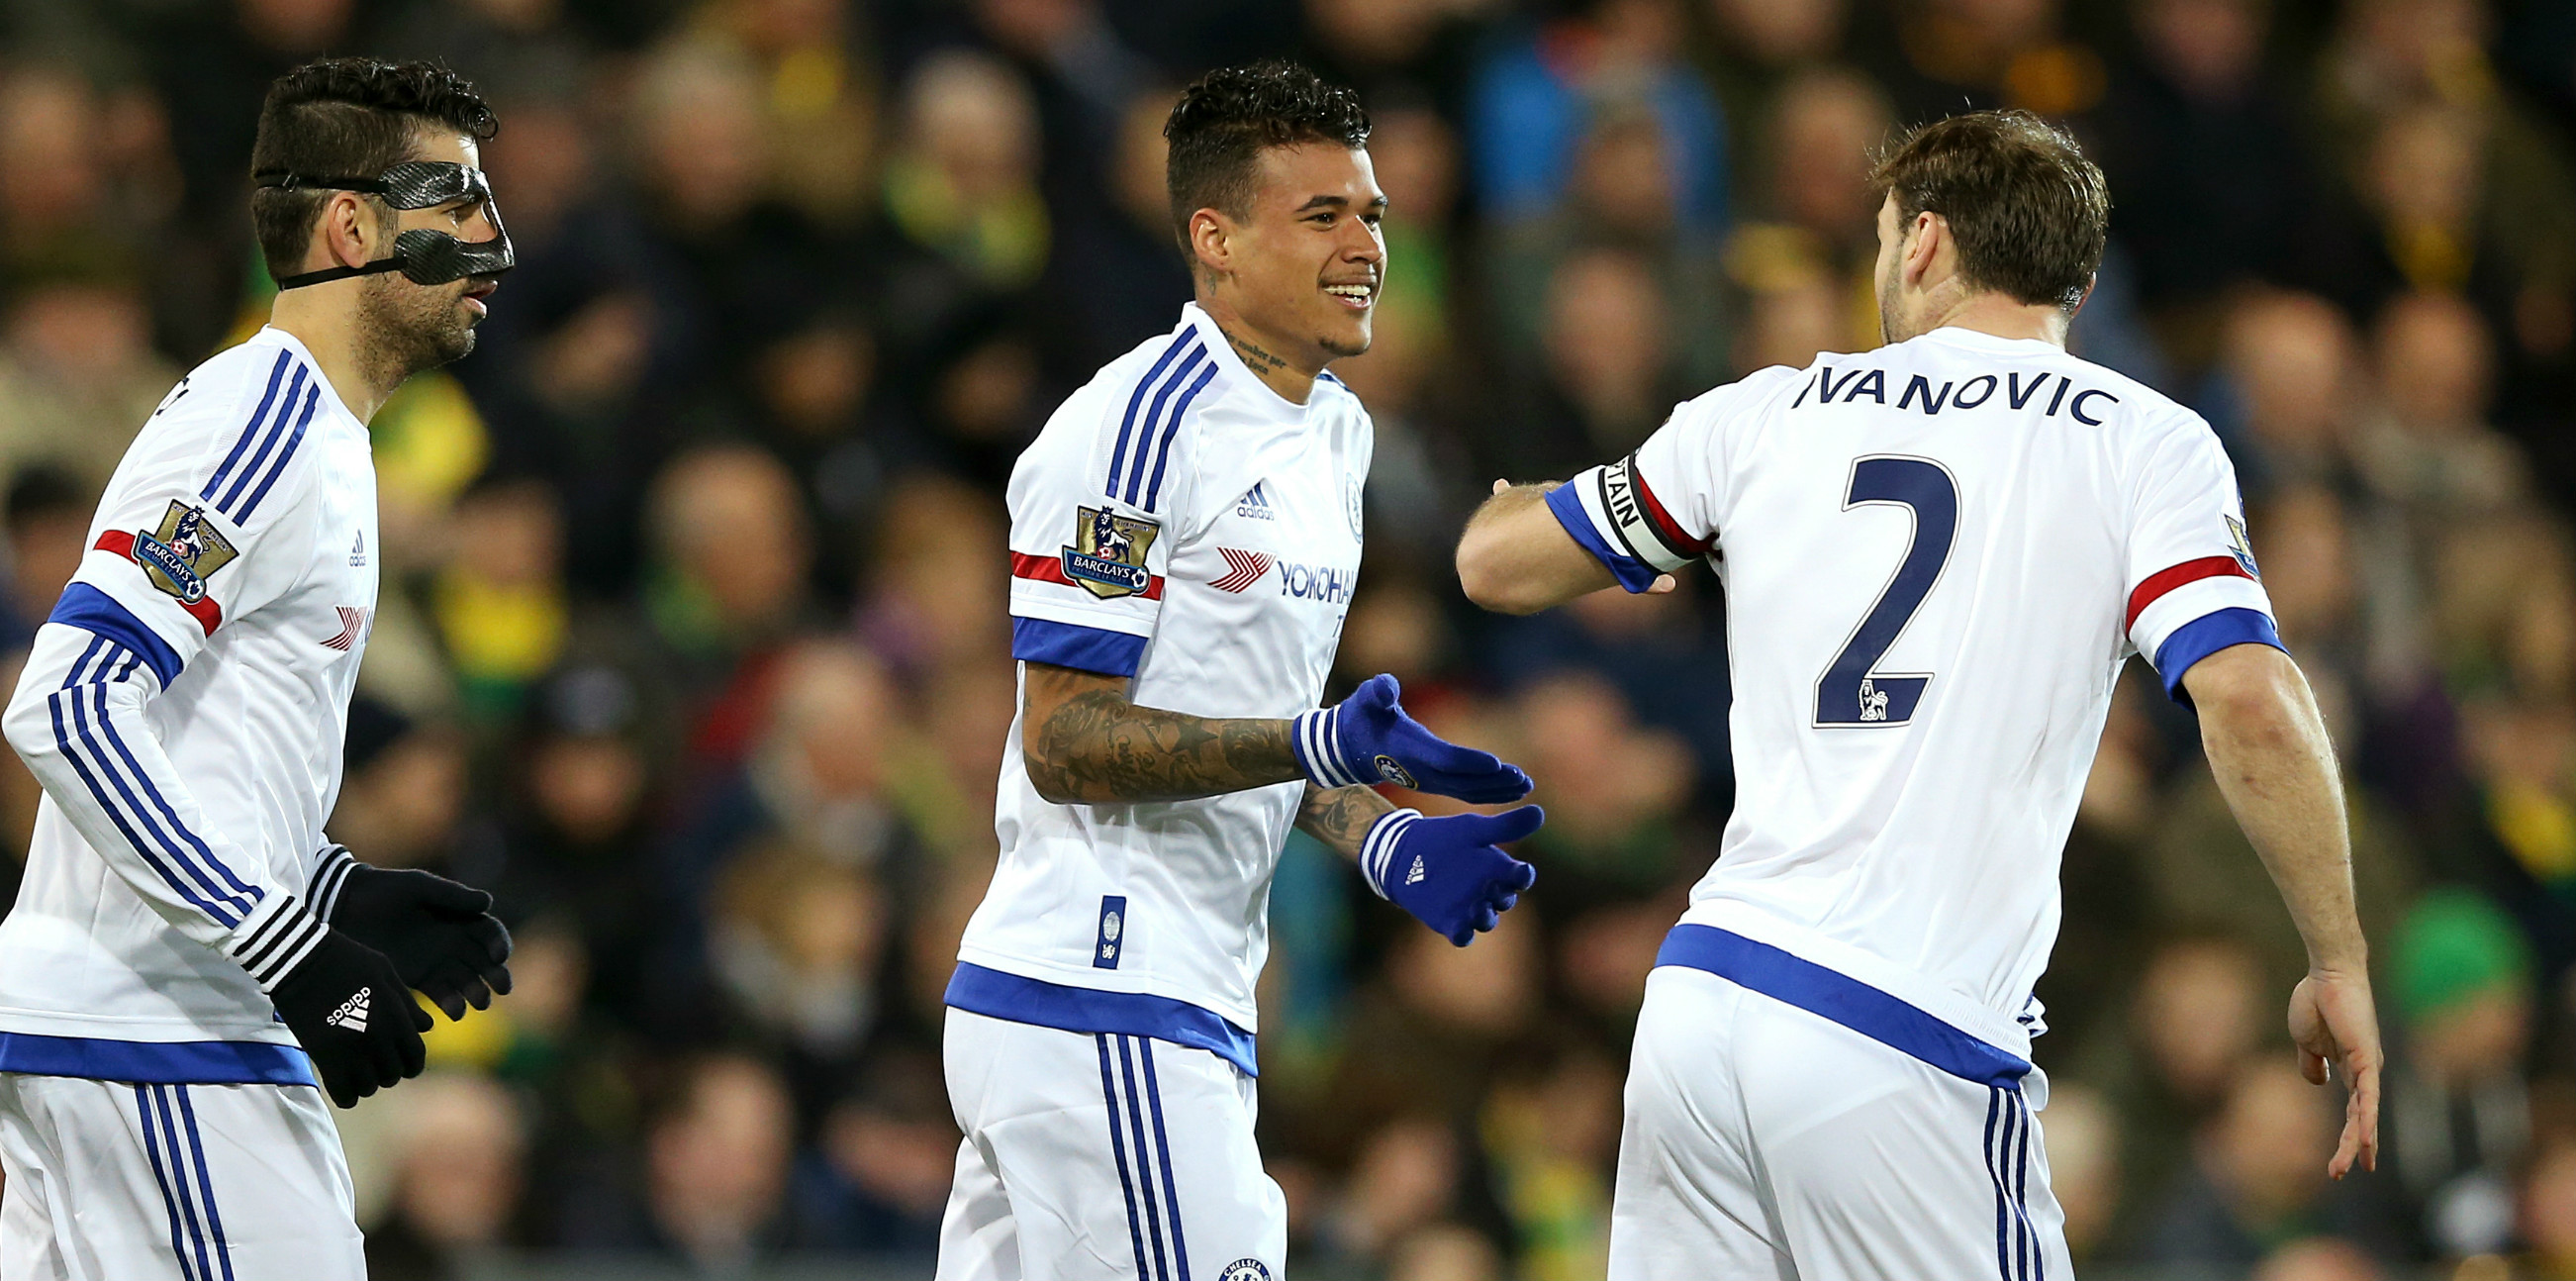 Kenedy scored Chelsea's first goal at Norwich